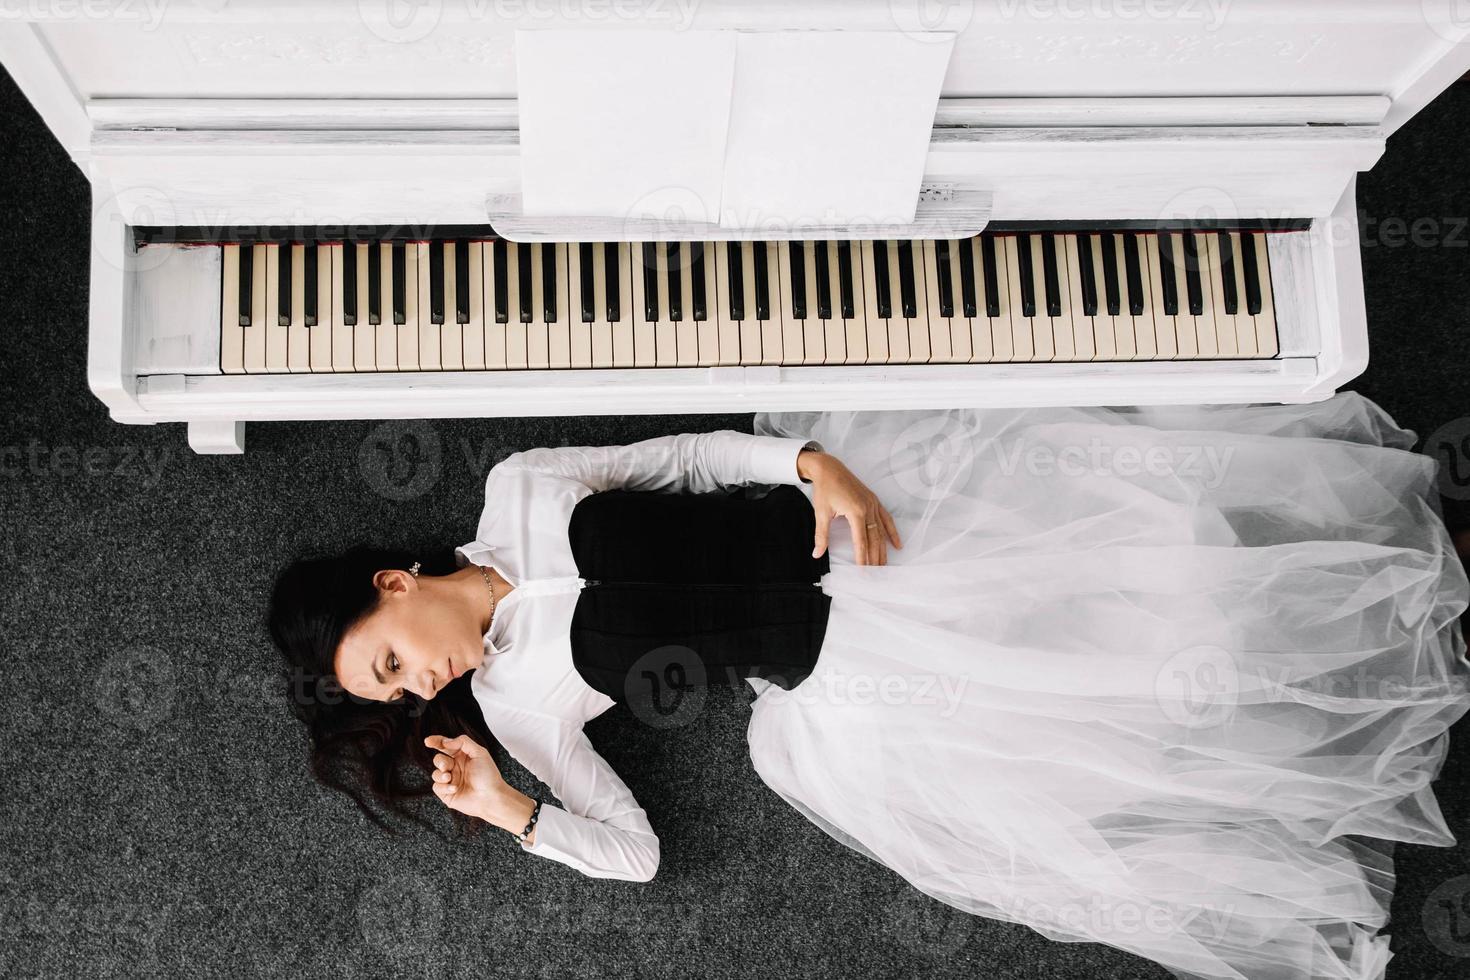 Beautiful woman dressed in a white dress with a black corset lies on the floor near white piano. Place for text or advertising. View from above photo